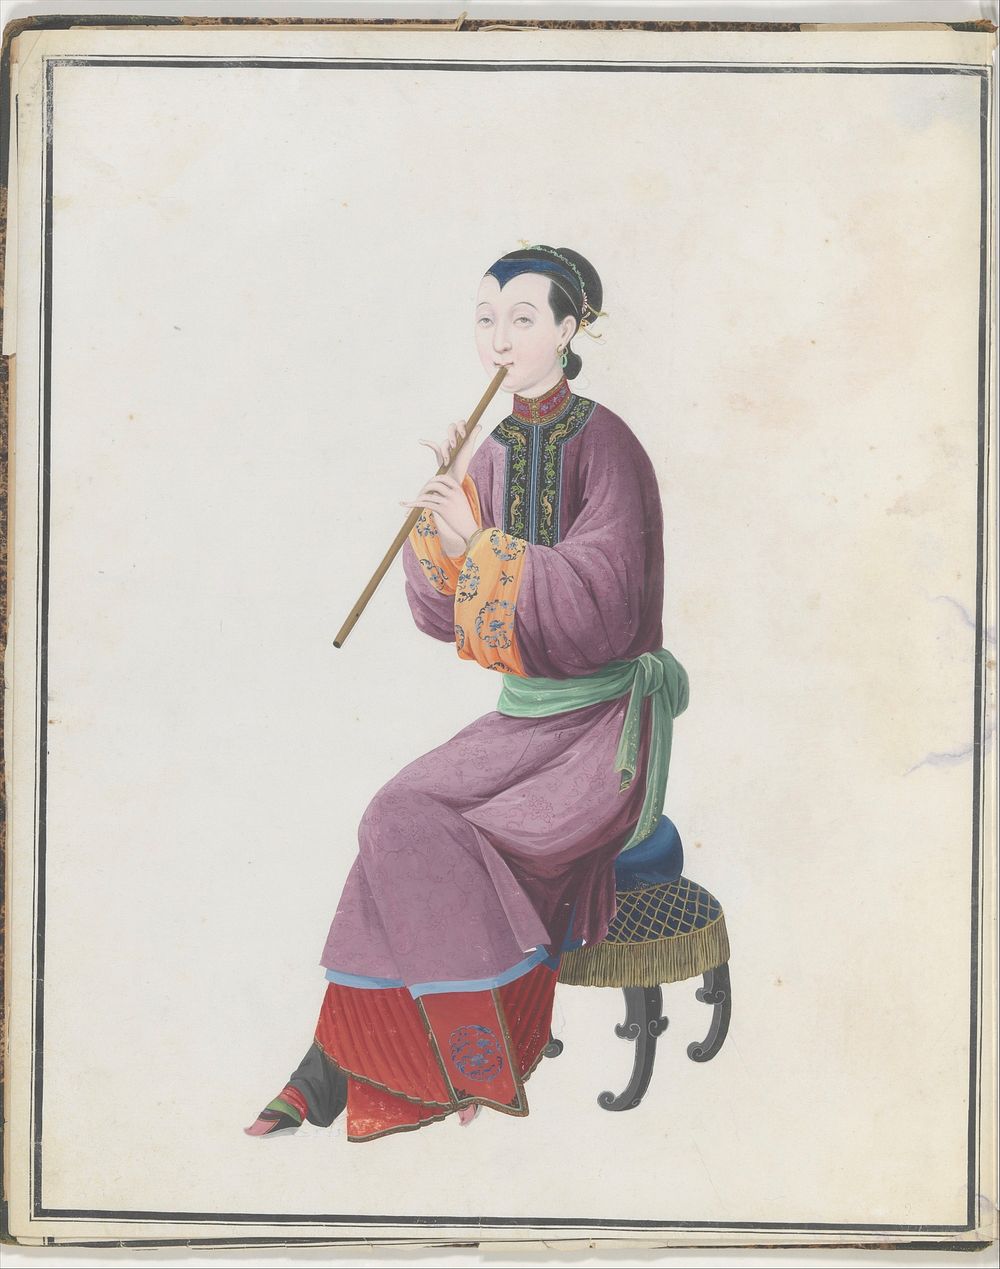 Watercolor of musician playing xiao, Chinese